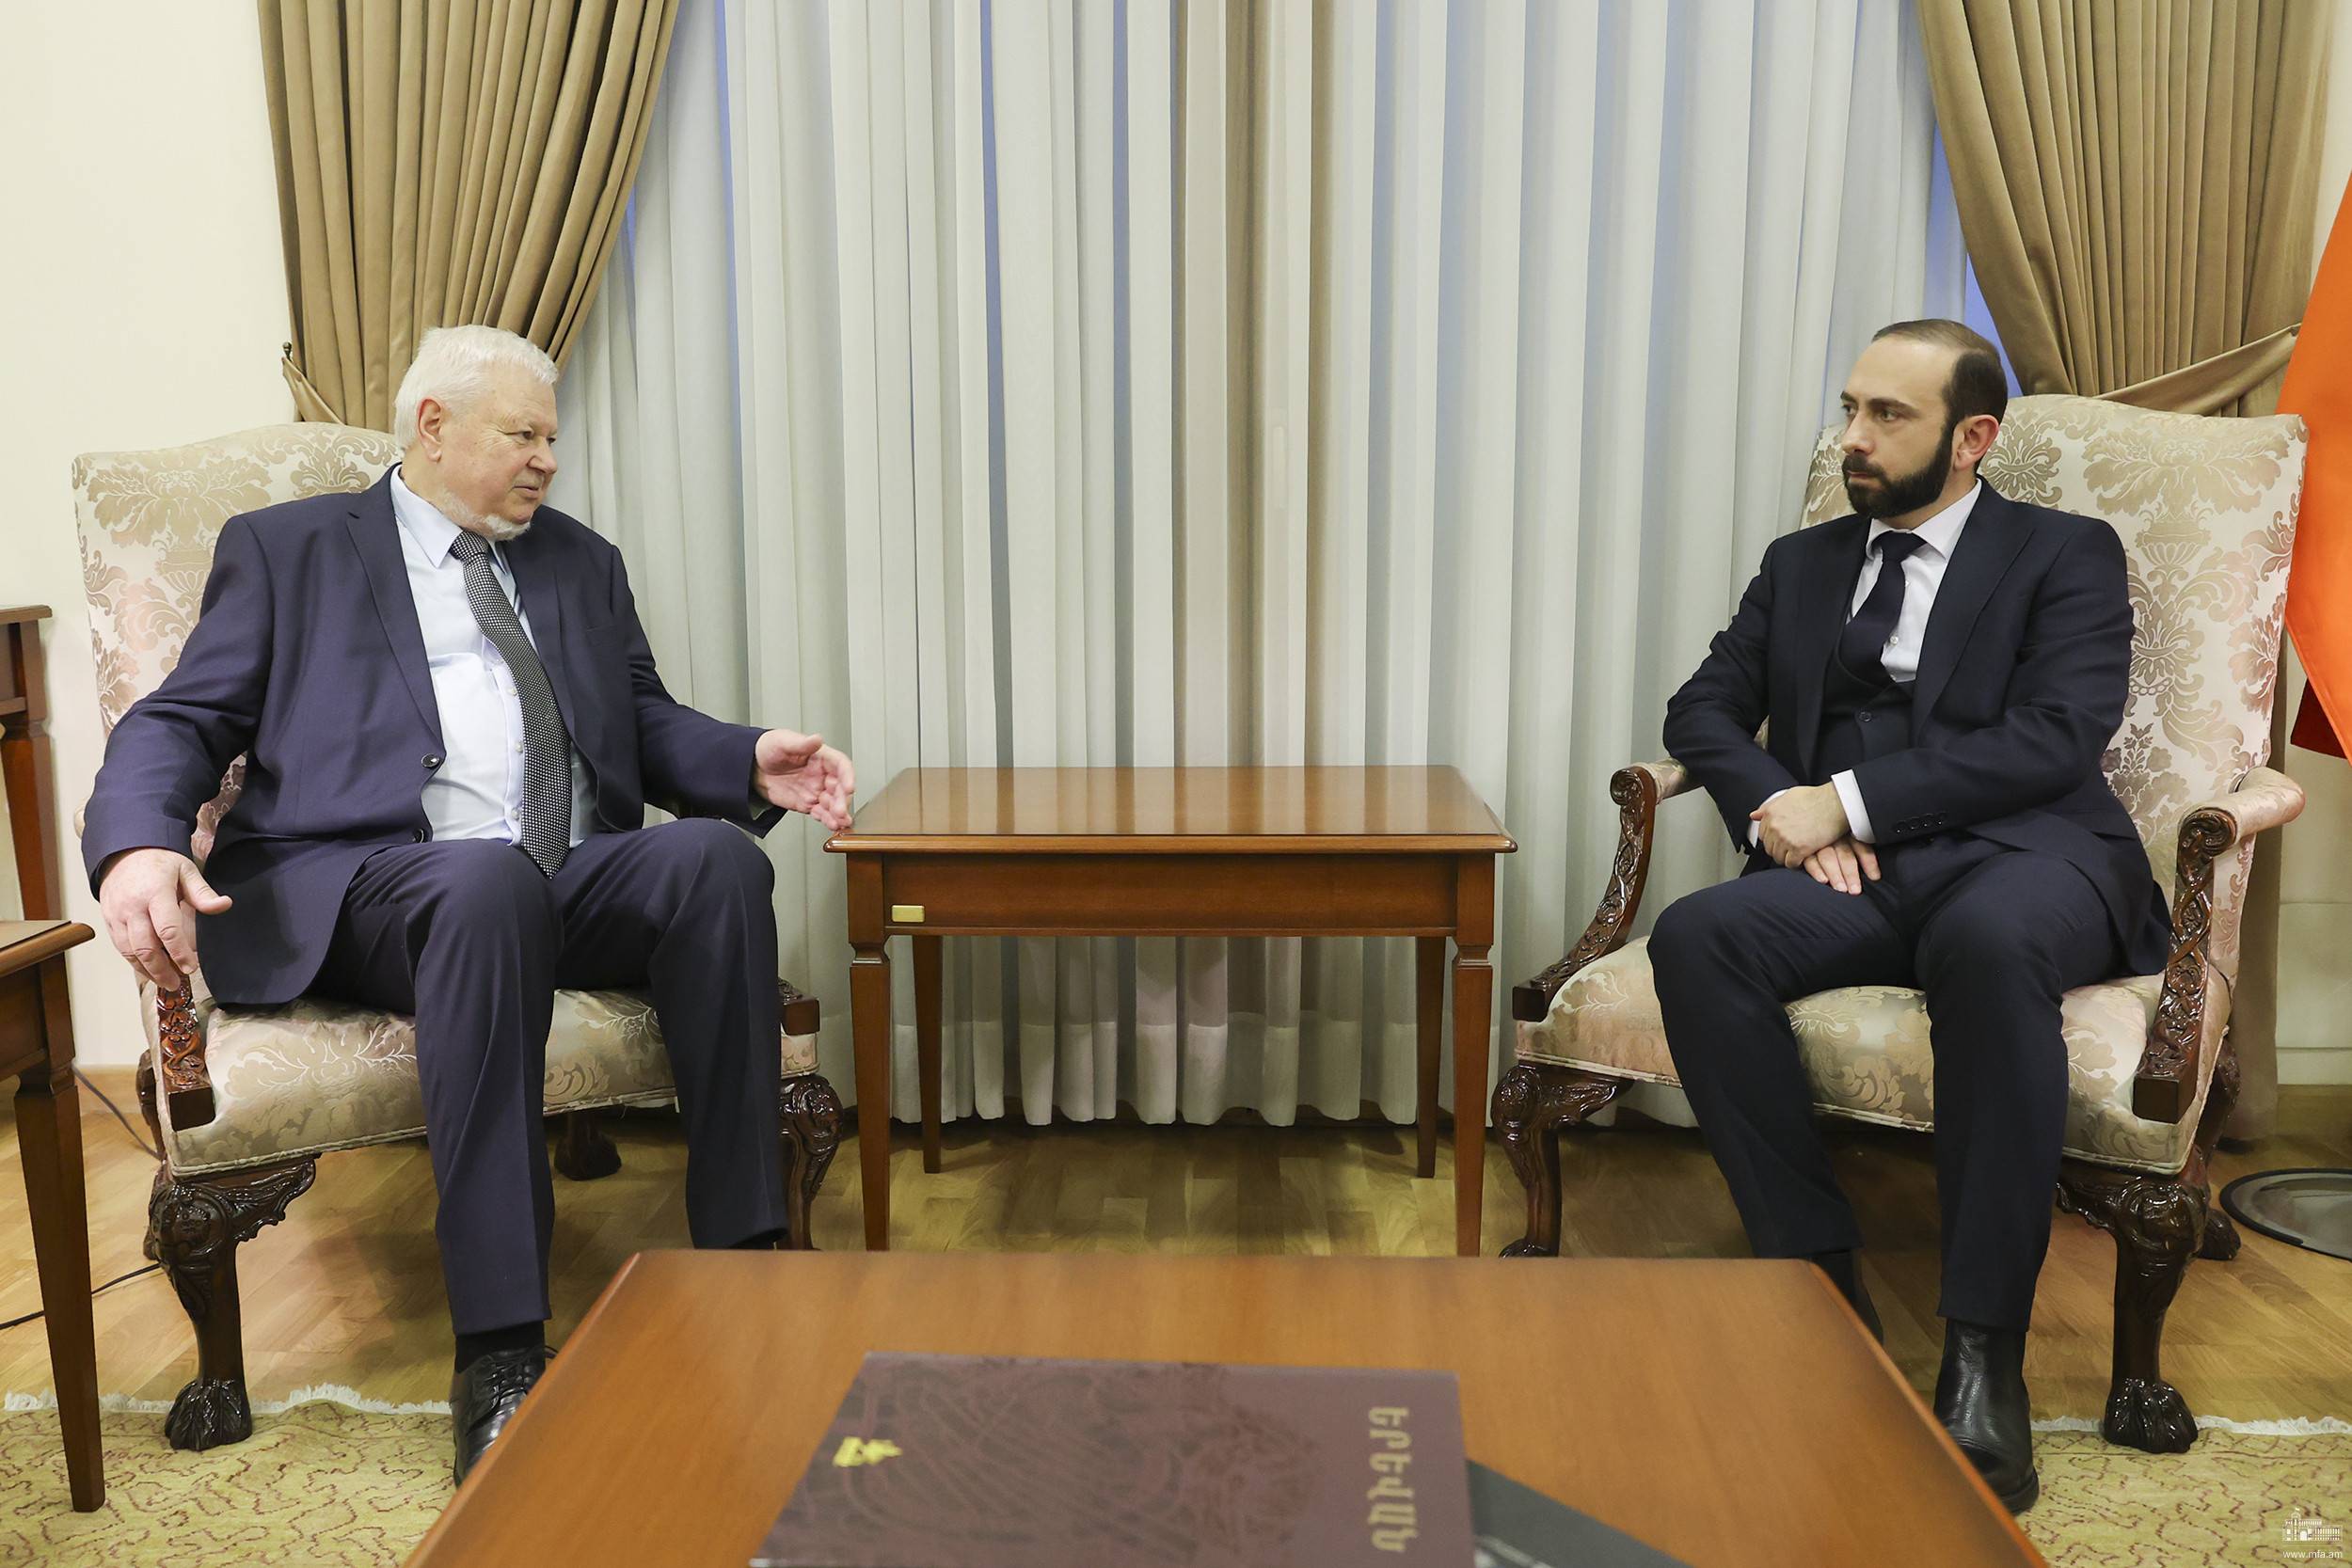 Foreign Minister of Armenia Ararat Mirzoyan received Andrzej Kasprzyk, the Personal Representative of the OSCE Chairman-in-Office